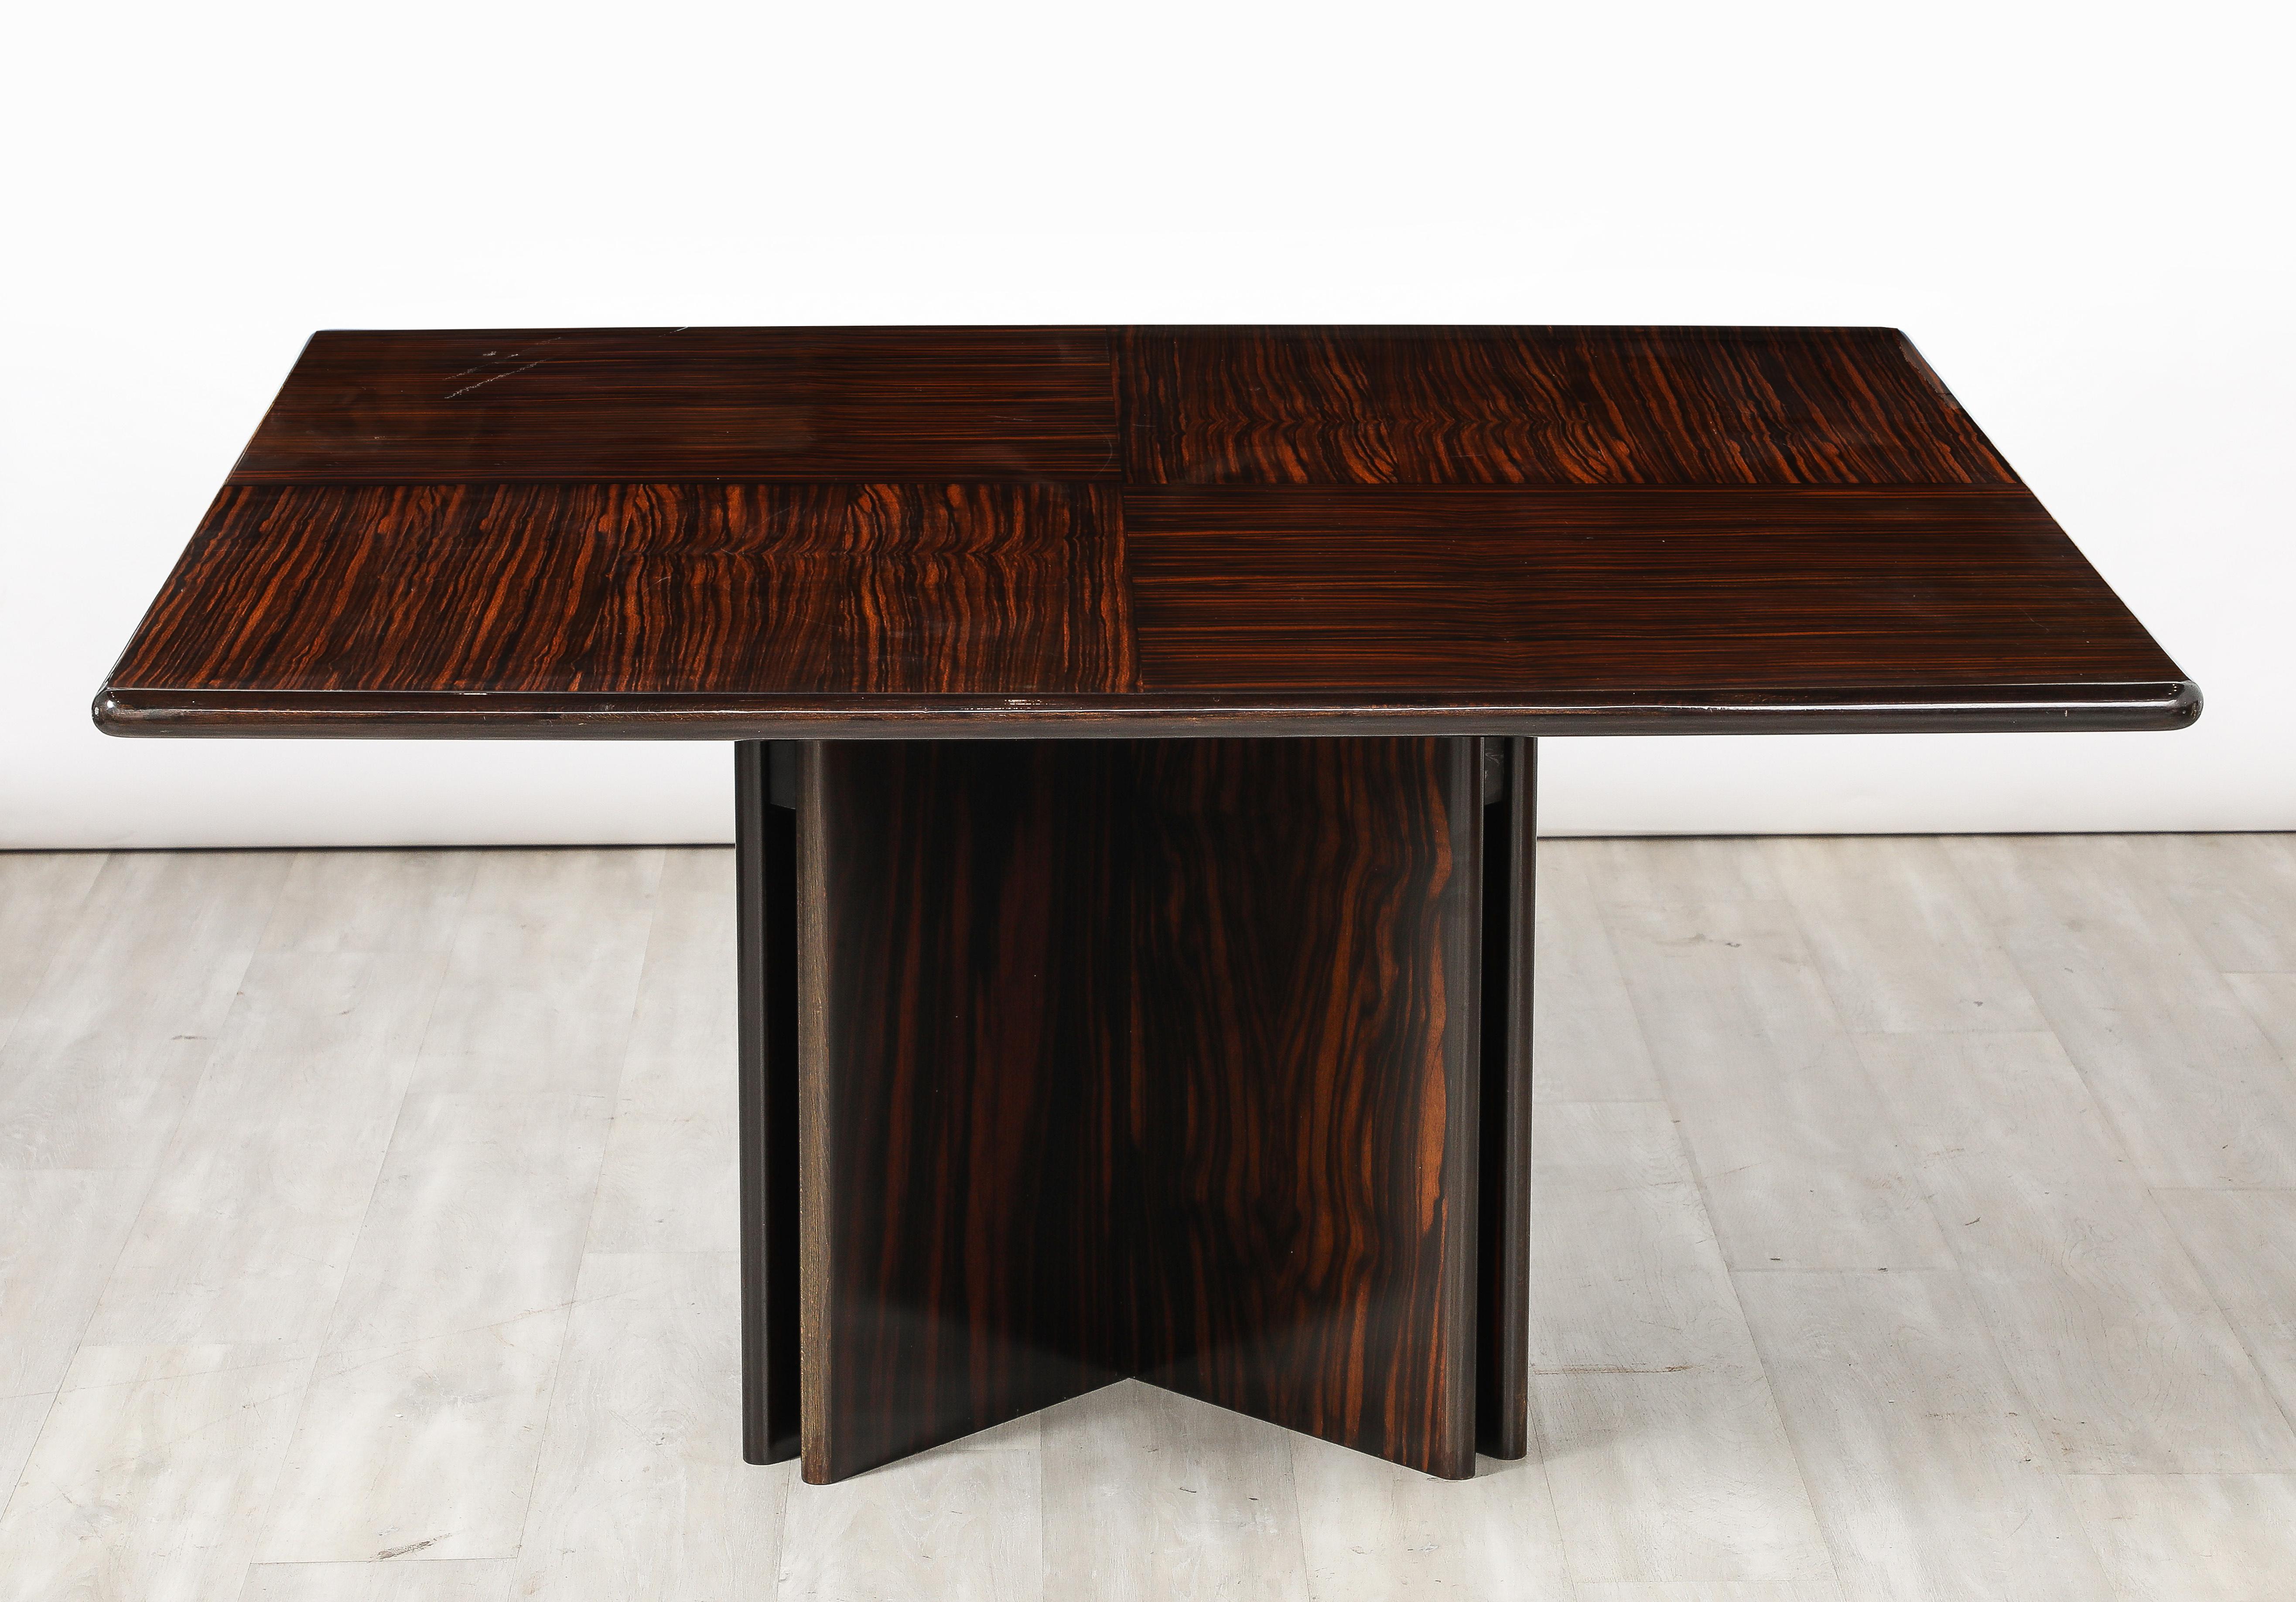 An Italian modernist dining table in Macassar ebony; the large square surface is supported on four bases.  A grand and glamorous statement piece.  Seats 8 and up to 12 comfortably.  The top is coated in acrylic and can be used conveniently for